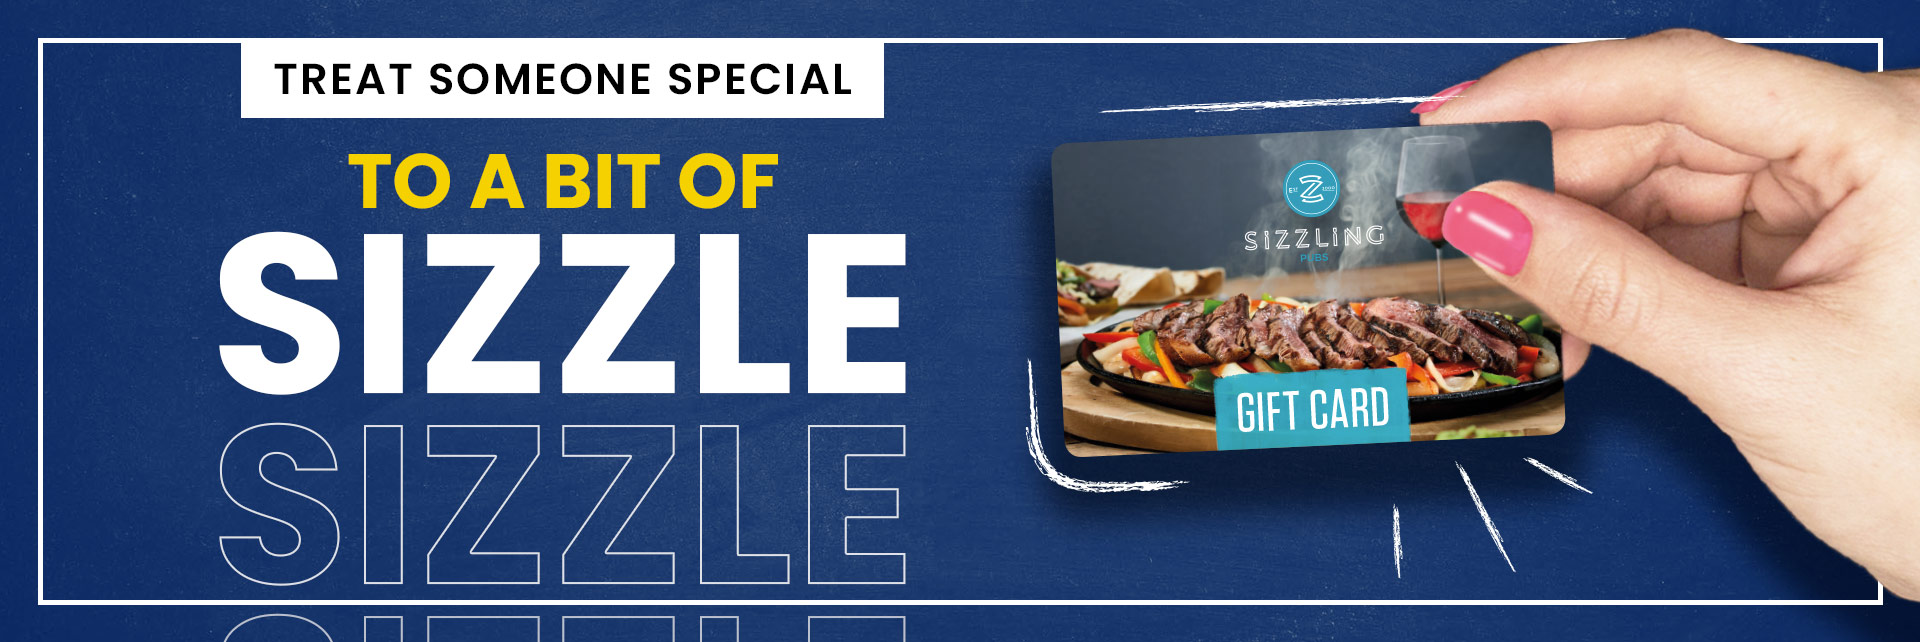 Sizzling Pubs Gift Card at The Wagon and Horses in Gloucester